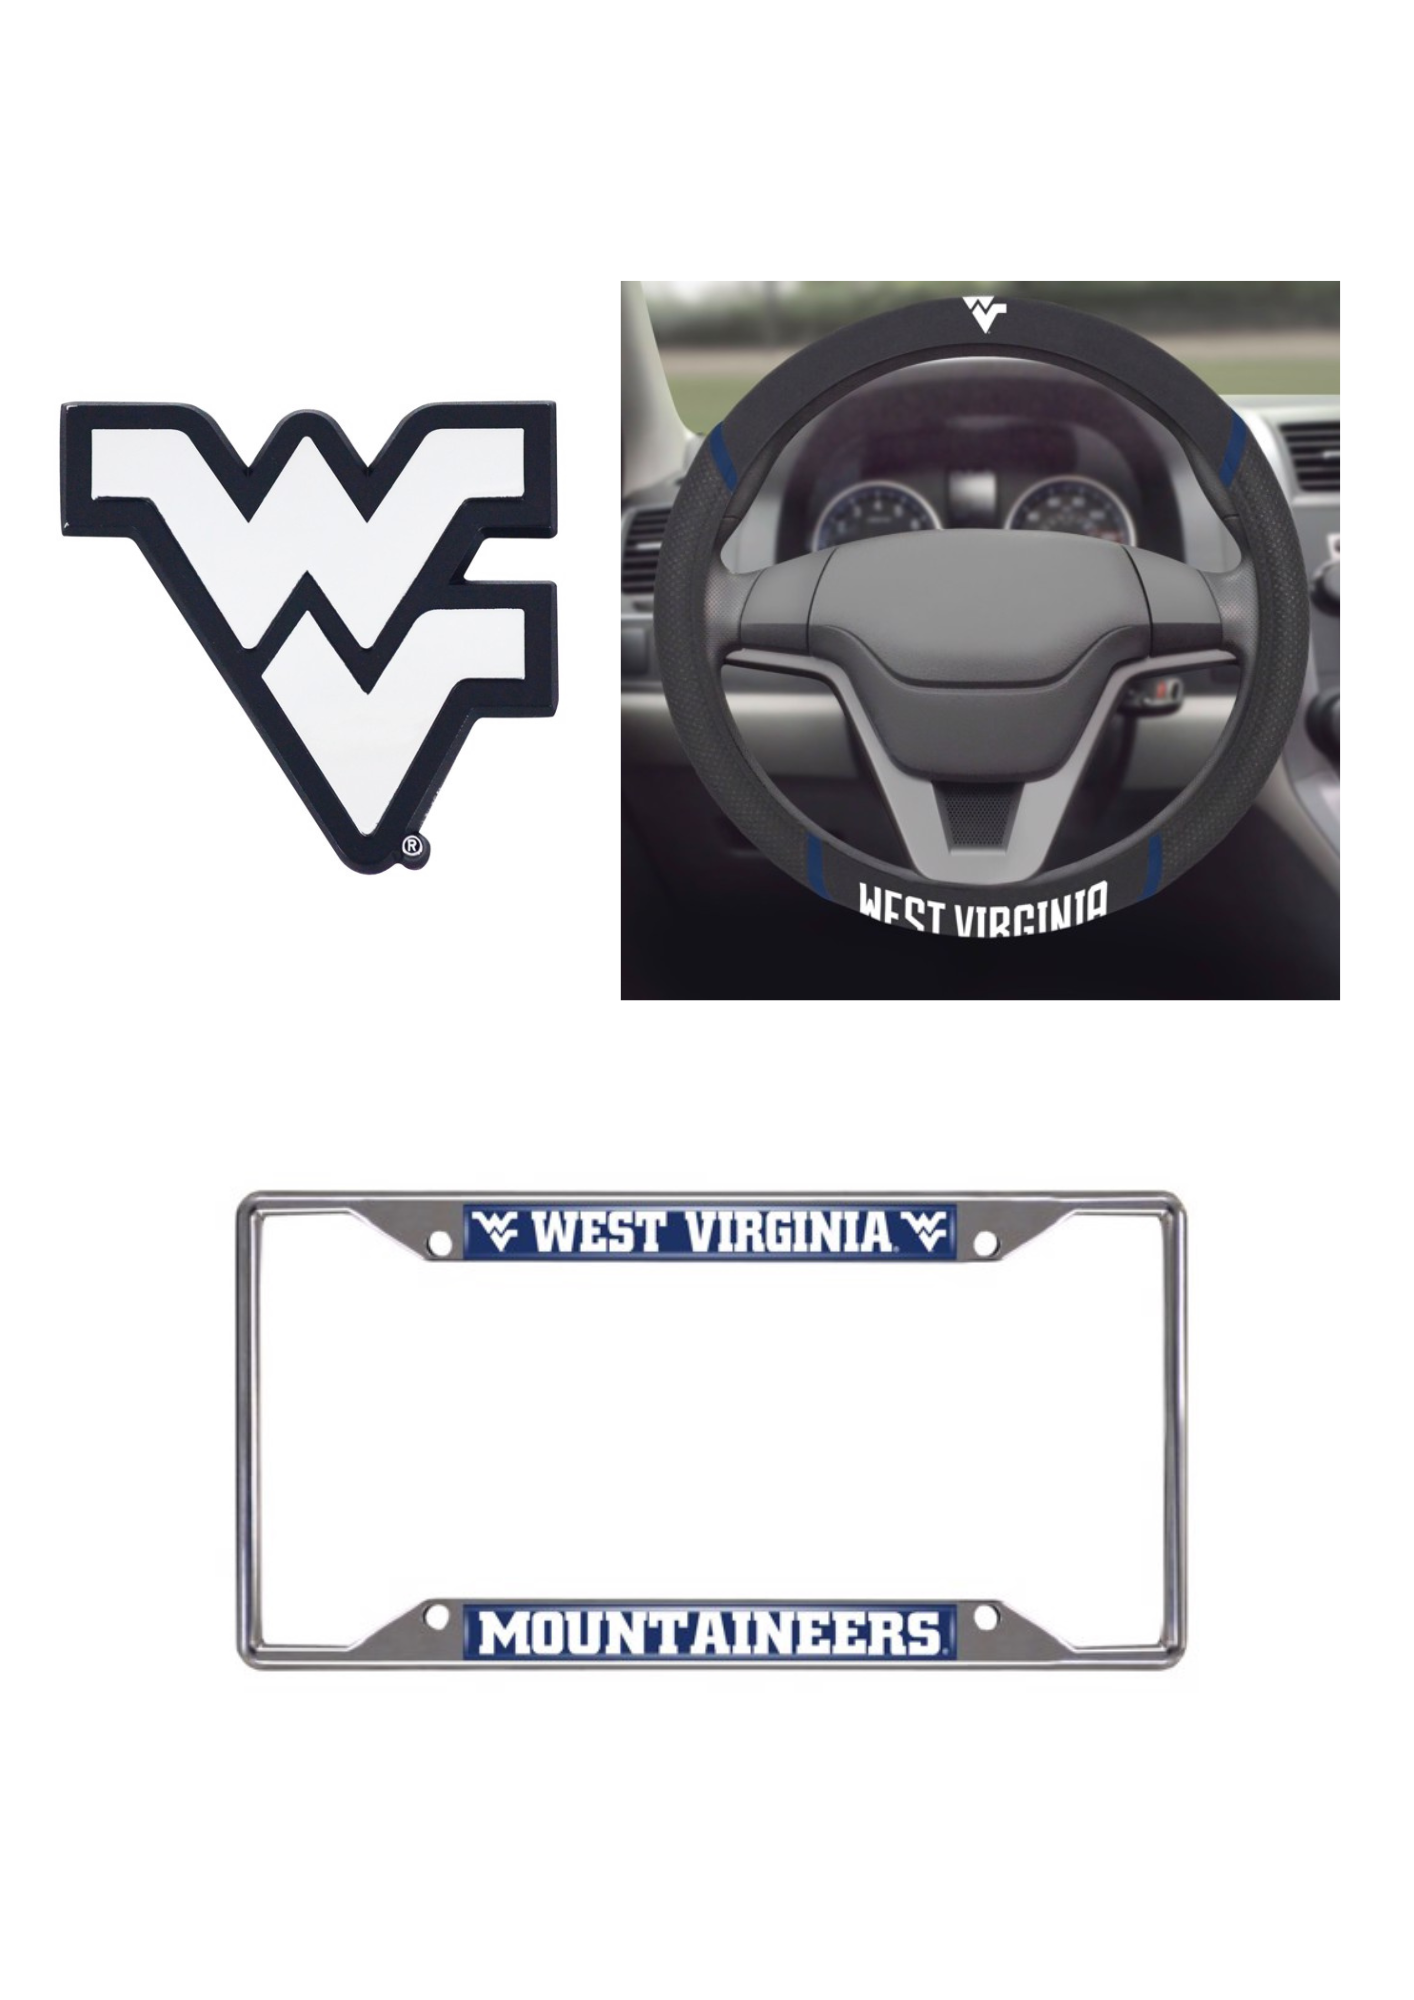 West Virginia Mountaineers Steering Wheel Cover, License Plate Frame, 3D Chrome Emblem